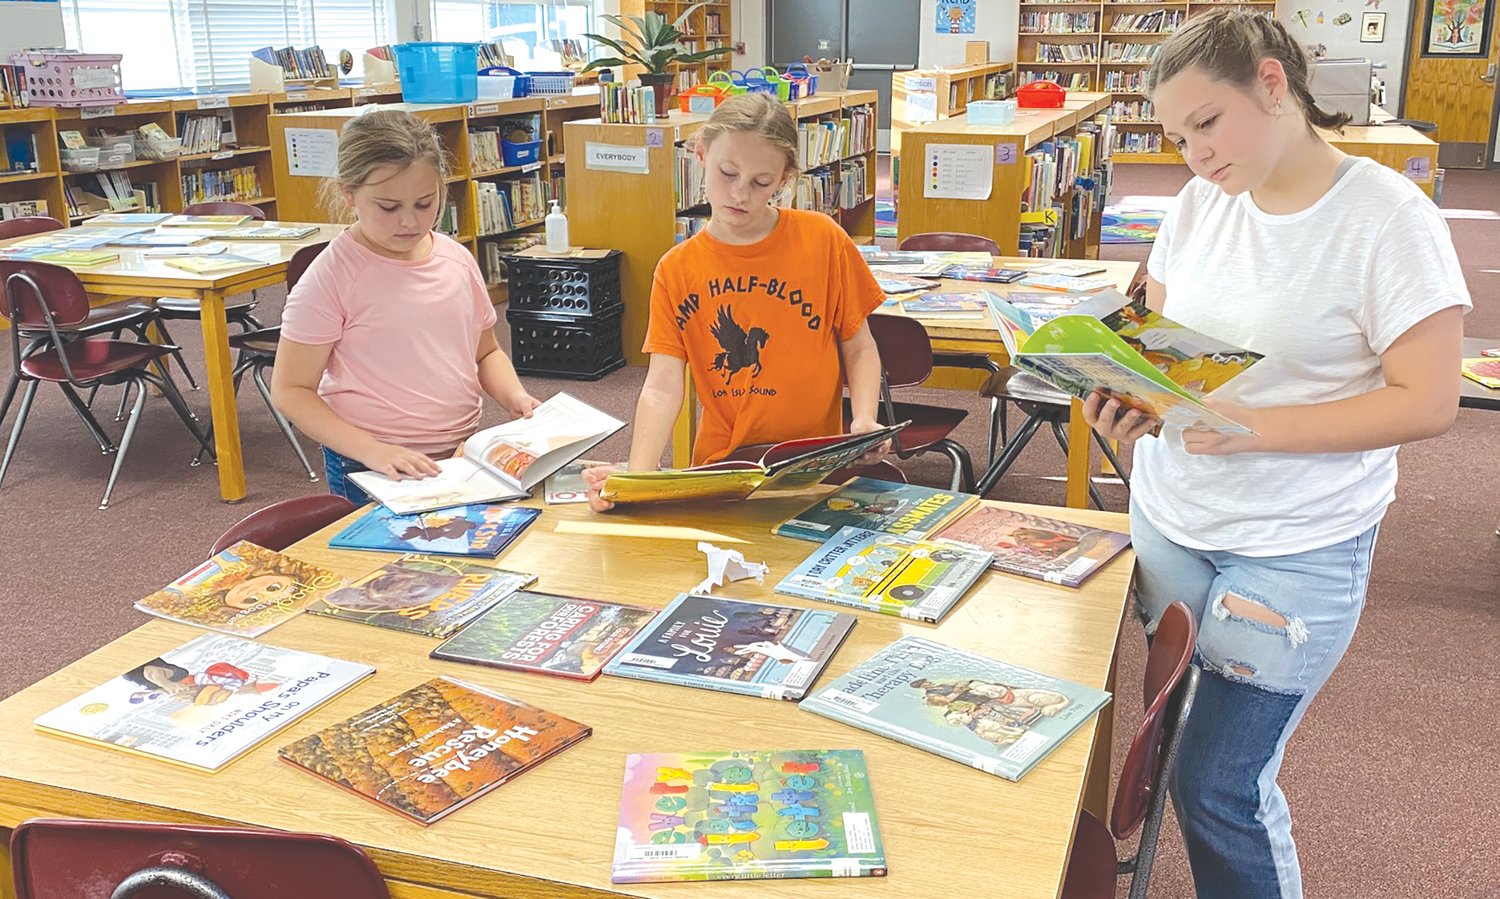 Eugene Field Elementary School held its first "Book Tasting" event last week as new librarian Justin Hamm brought over the concept from North Callaway, where he worked for years before coming to Mexico this year.
[Submitted by Christine Harper]